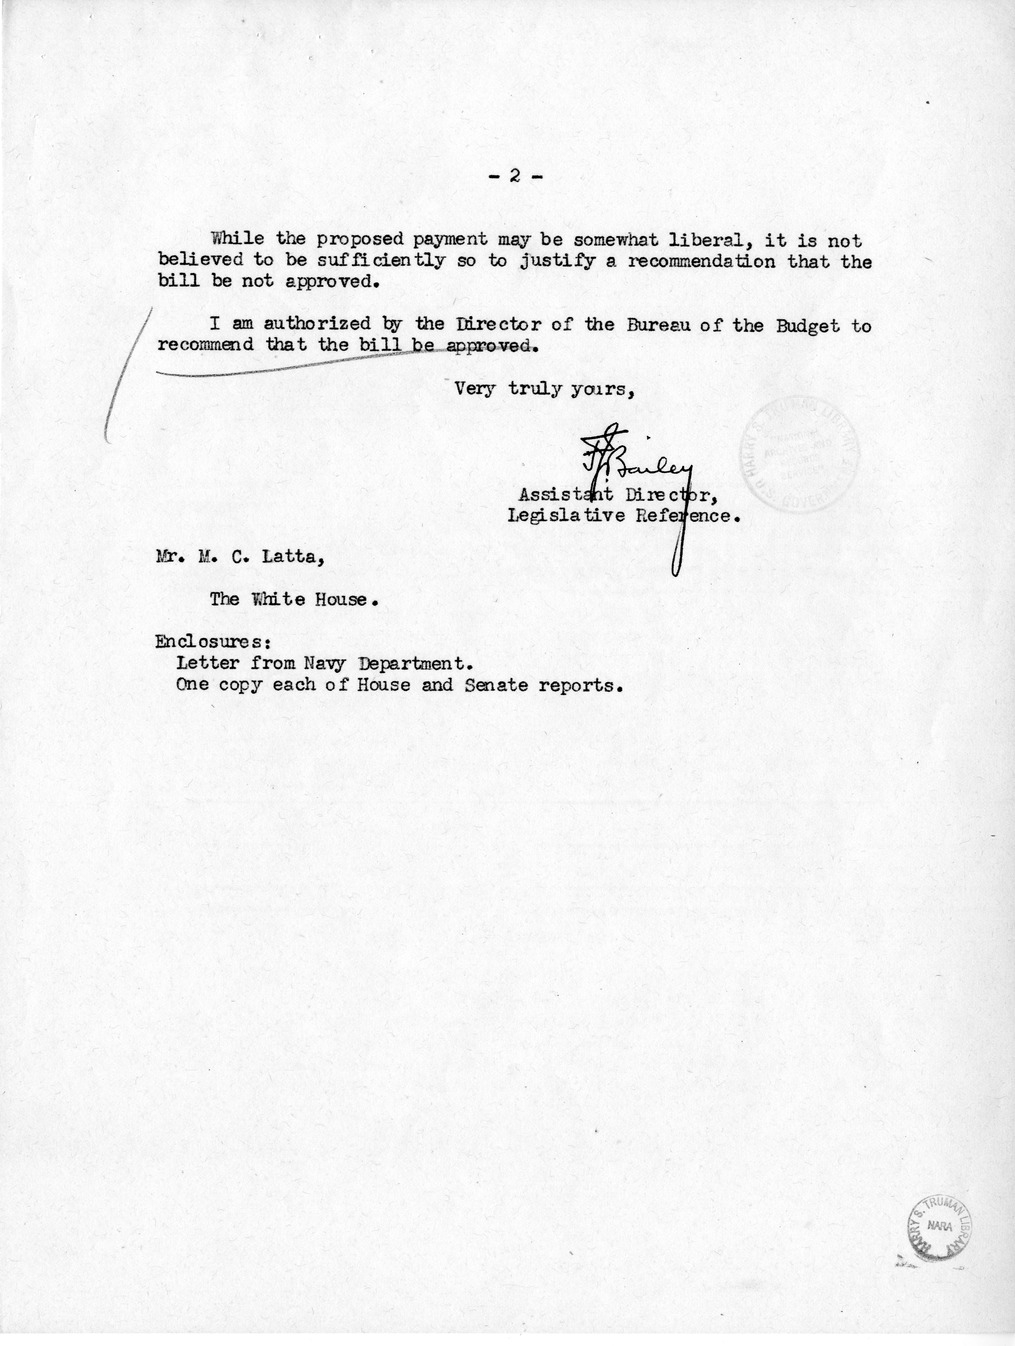 Memorandum from Frederick J. Bailey to M. C. Latta, H.R. 999, For the Relief of Lily L. Carren, with Attachments